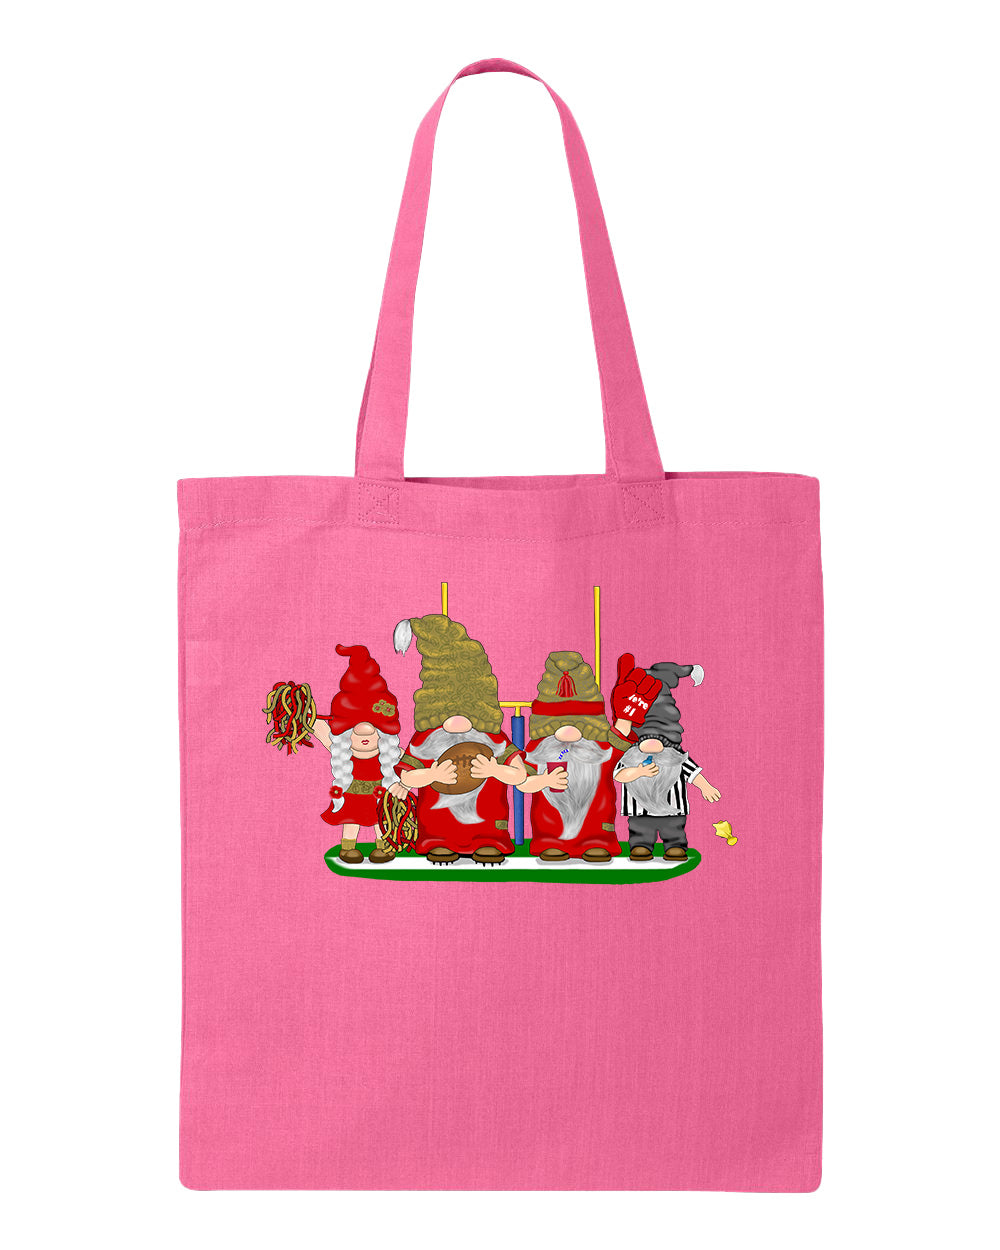 Red & Gold Football Gnomes  (similar to San Fransisco) on Tote